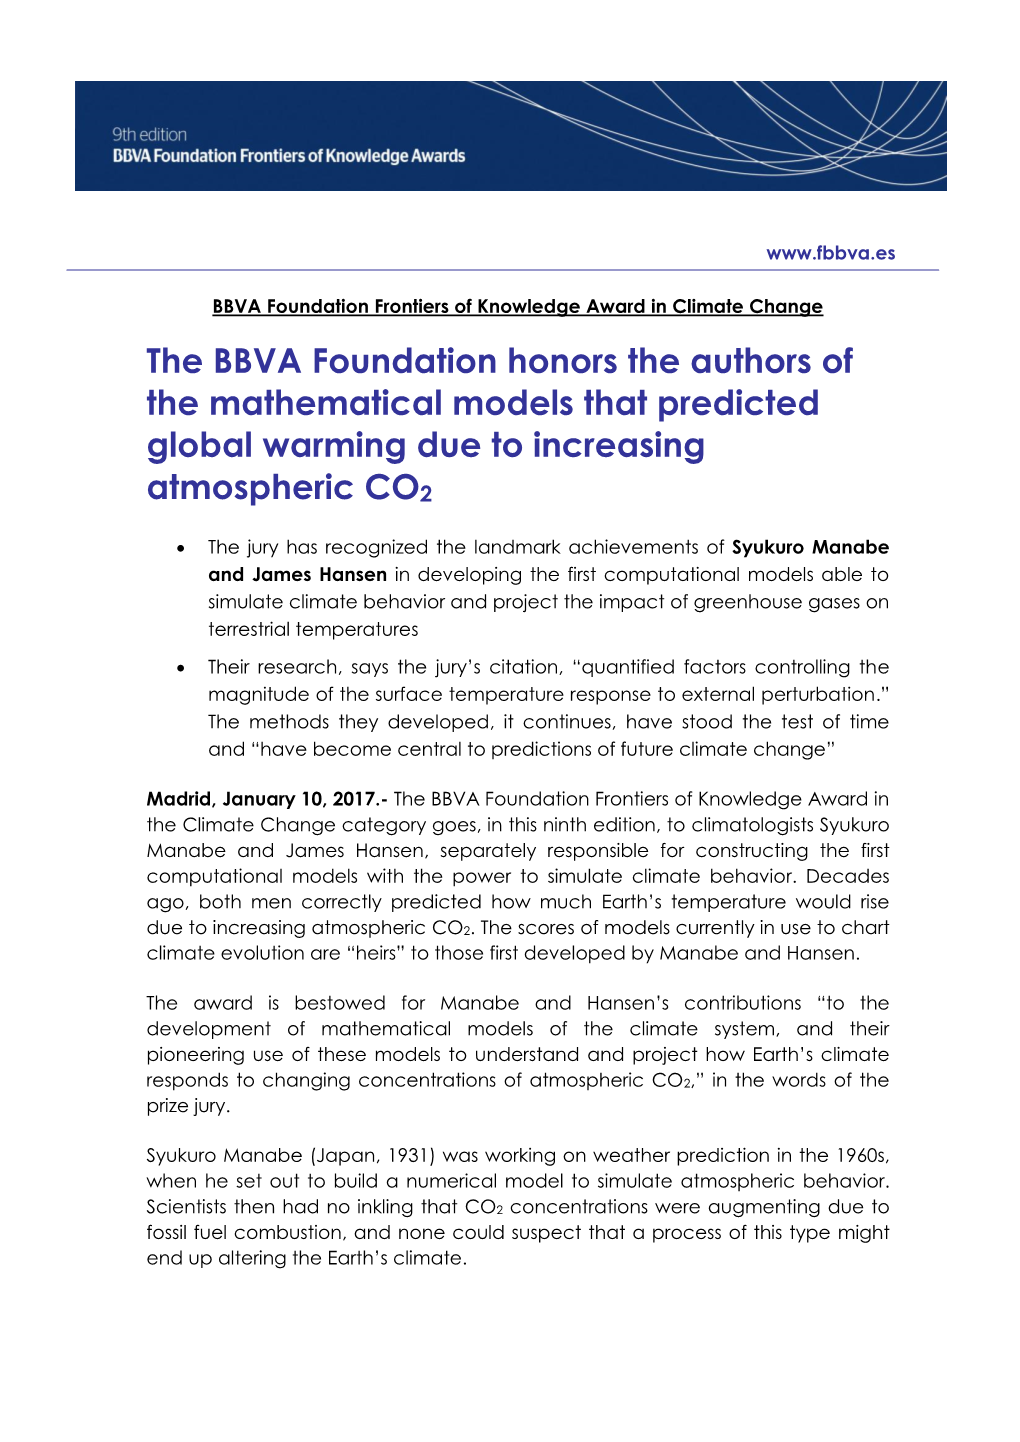 The BBVA Foundation Honors the Authors of the Mathematical Models That Predicted Global Warming Due to Increasing Atmospheric CO2